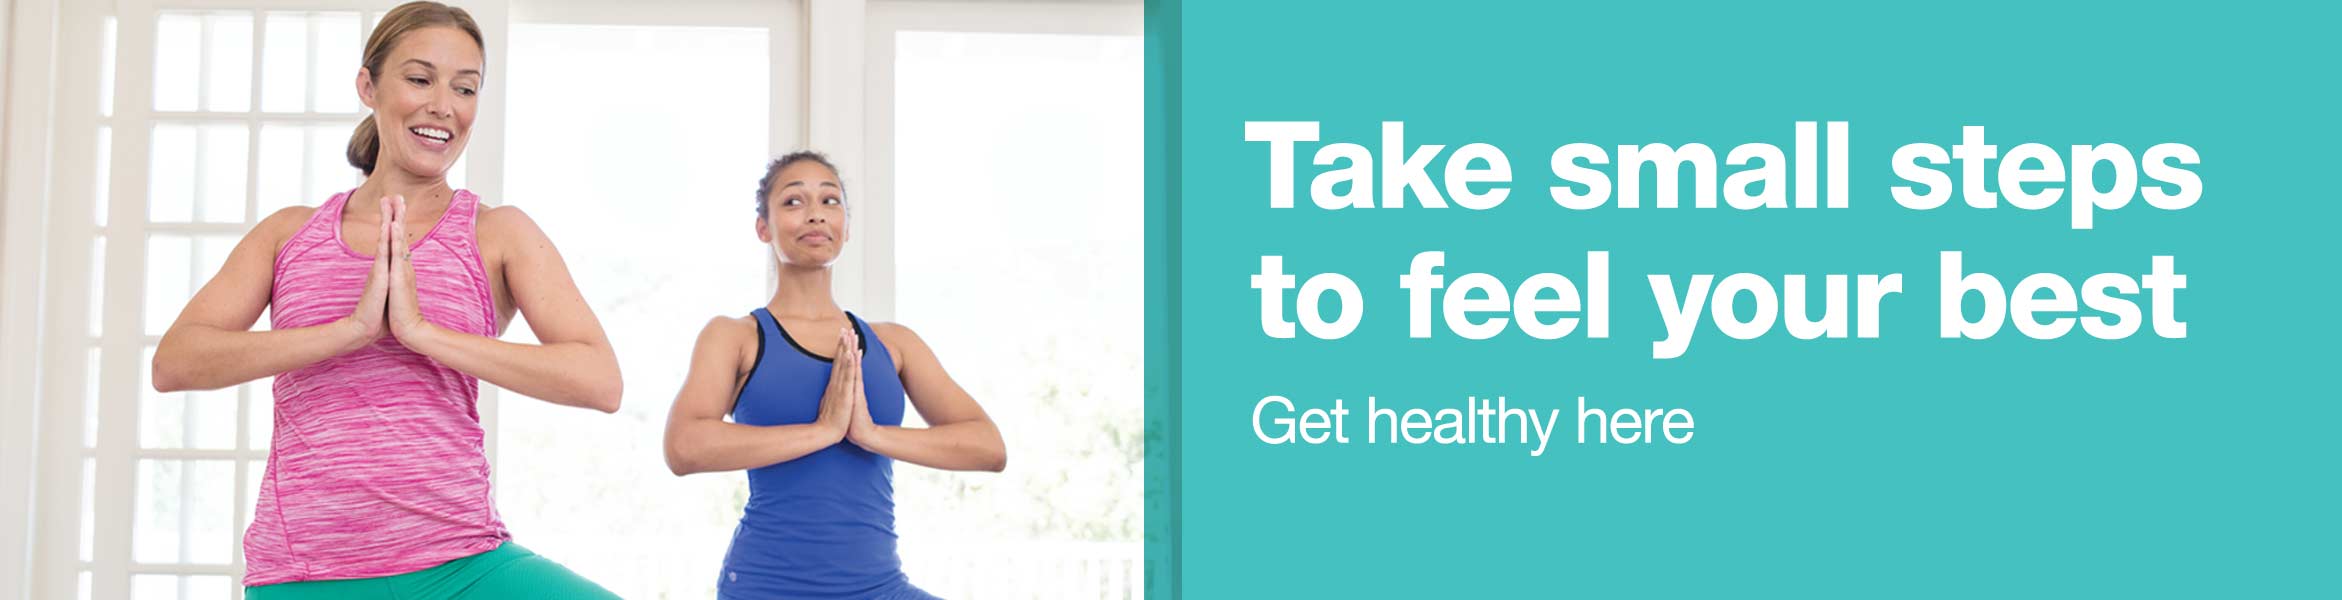 Take small steps to feel your best. Get healthy here.